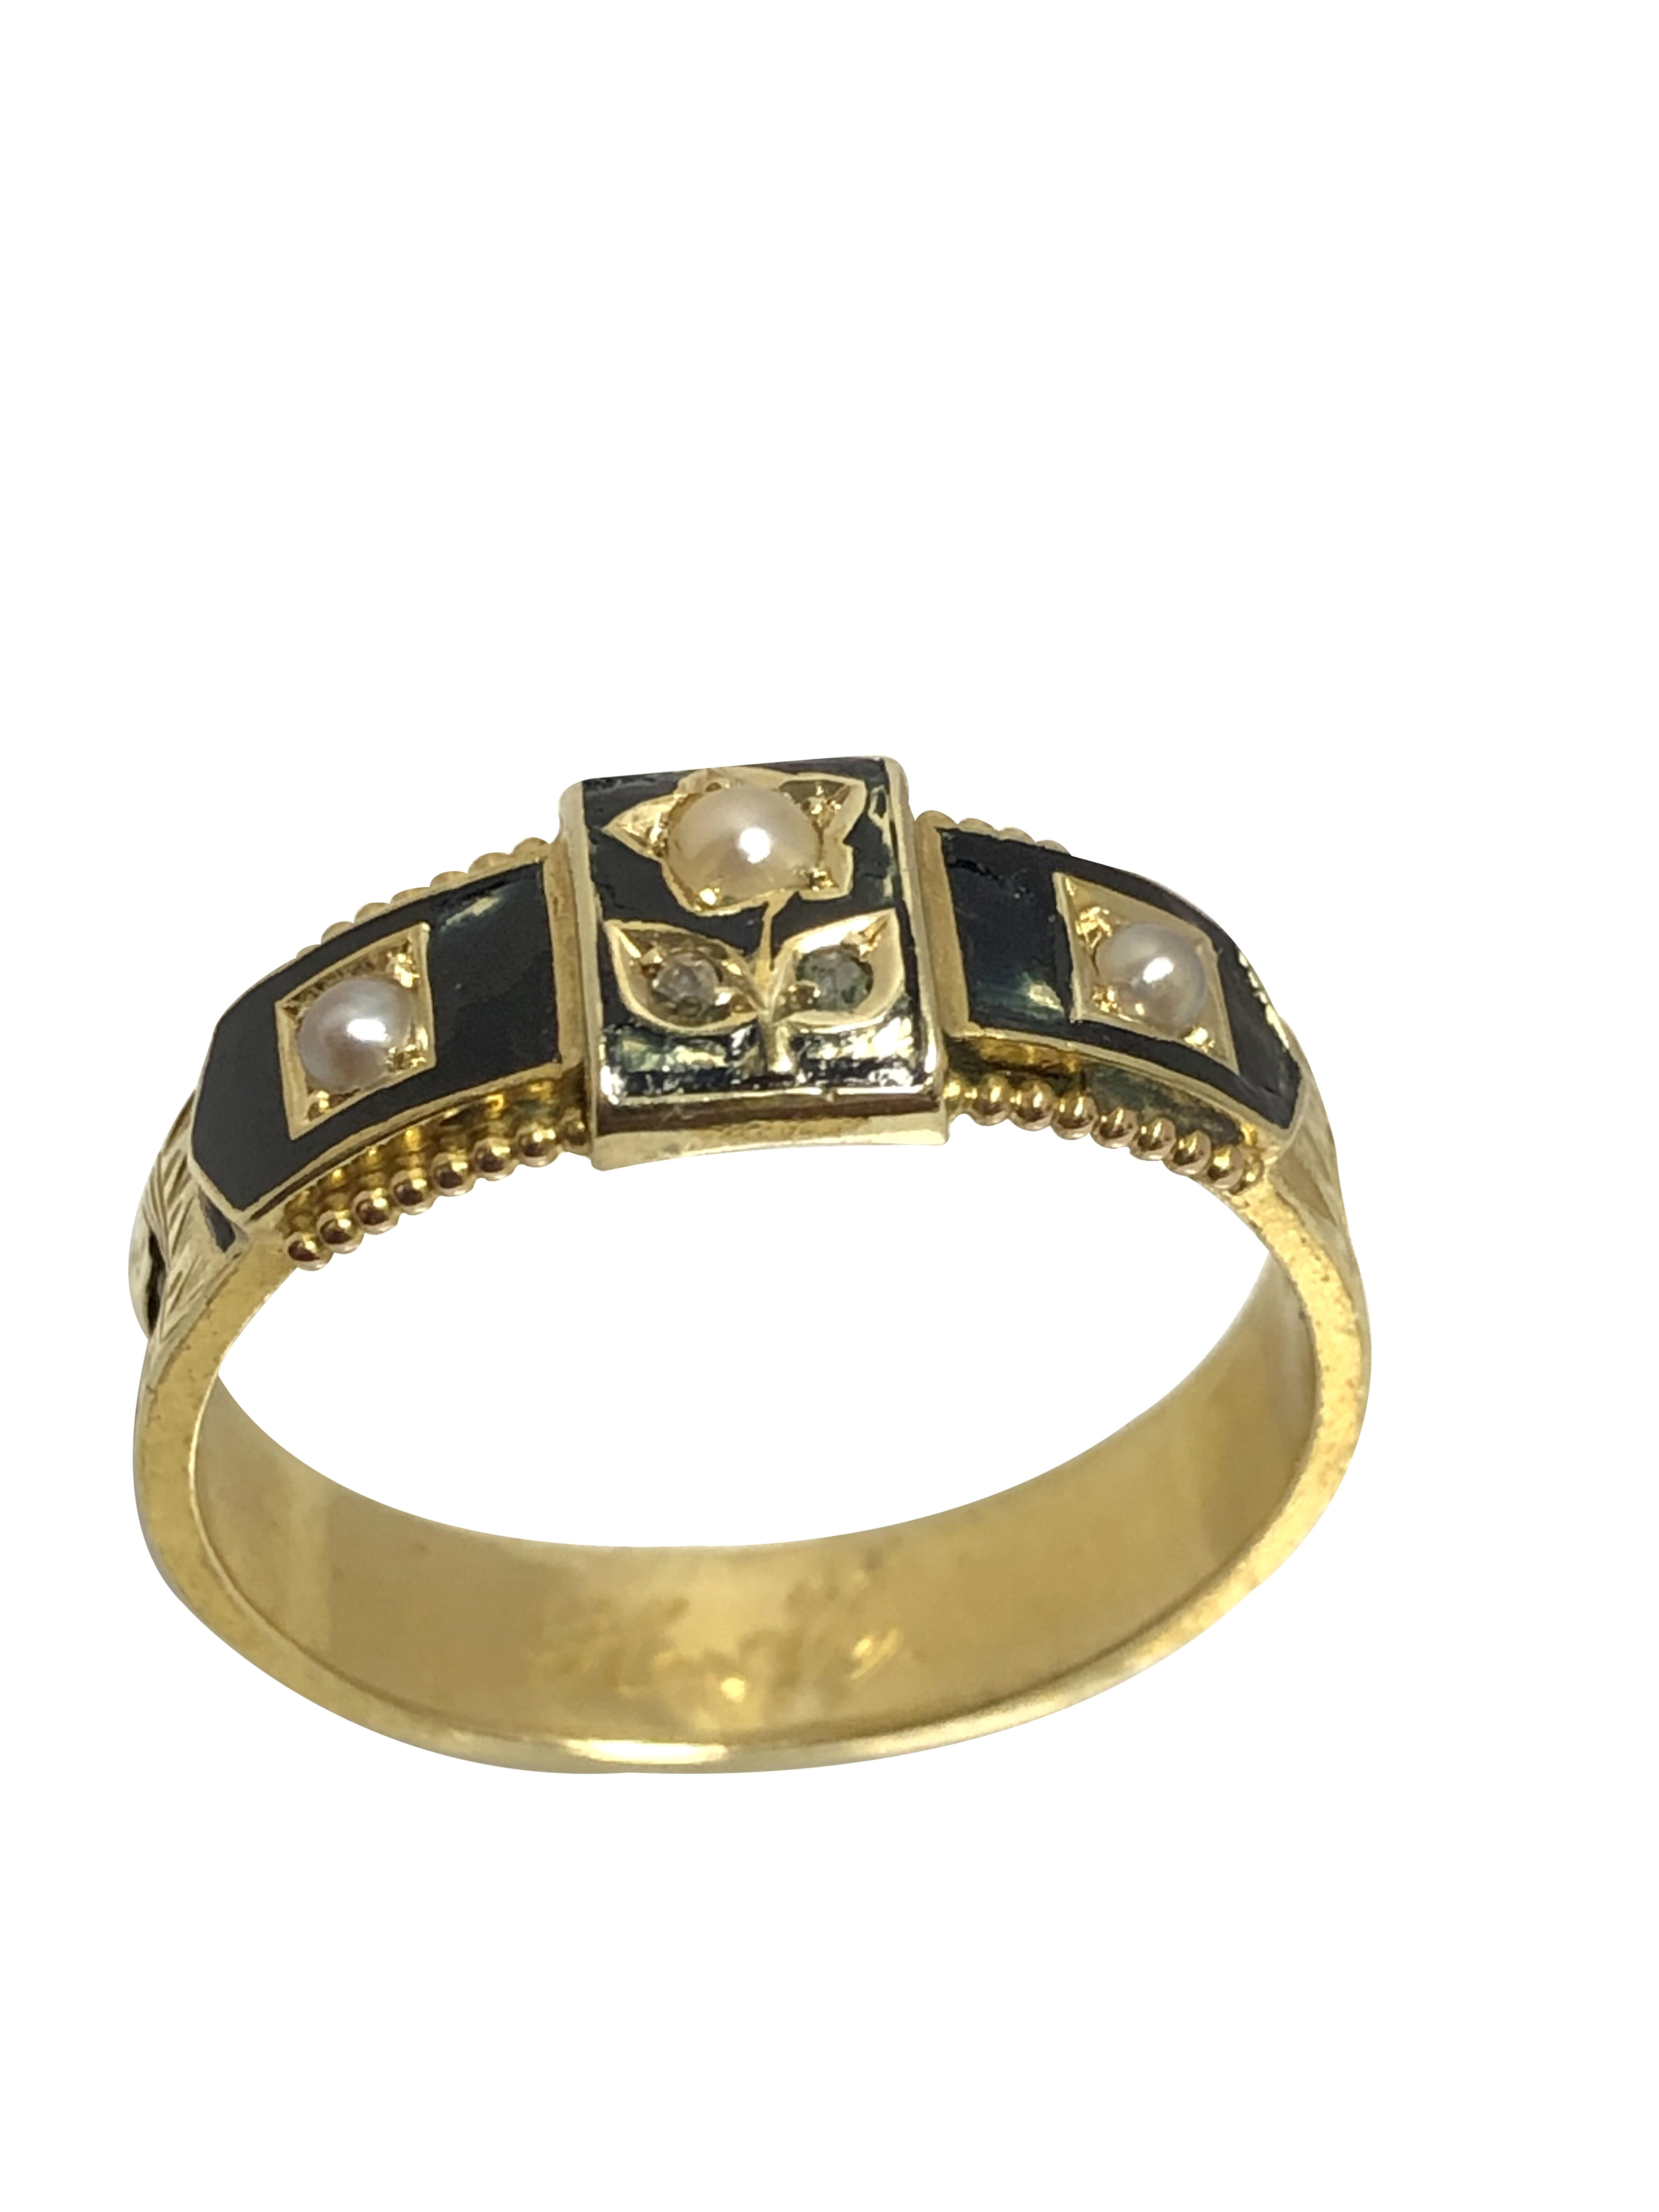 Circa 1880s Victorian Memorial, Memento 15 Karat Yellow Gold Ring, Measuring 4 M.M. wide, intricately detailed with woven Hair within the ring, further decorated in Black Enamel and set with Pearls and Diamonds. The ring has Hallmarks of Chester